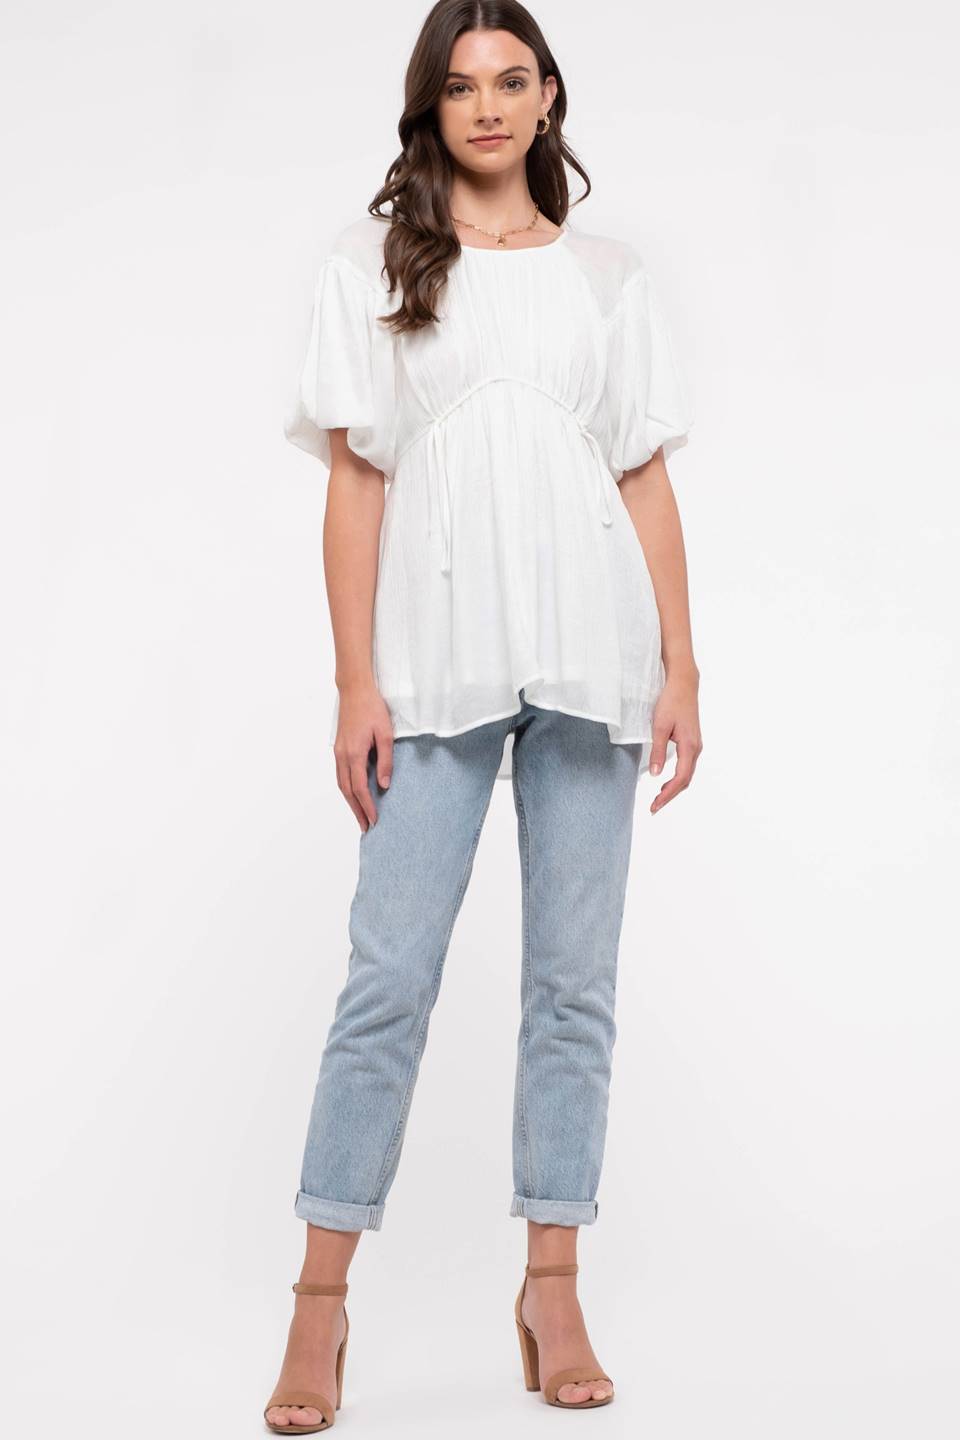 Always Yours Empire Waist Top Free People Vibes